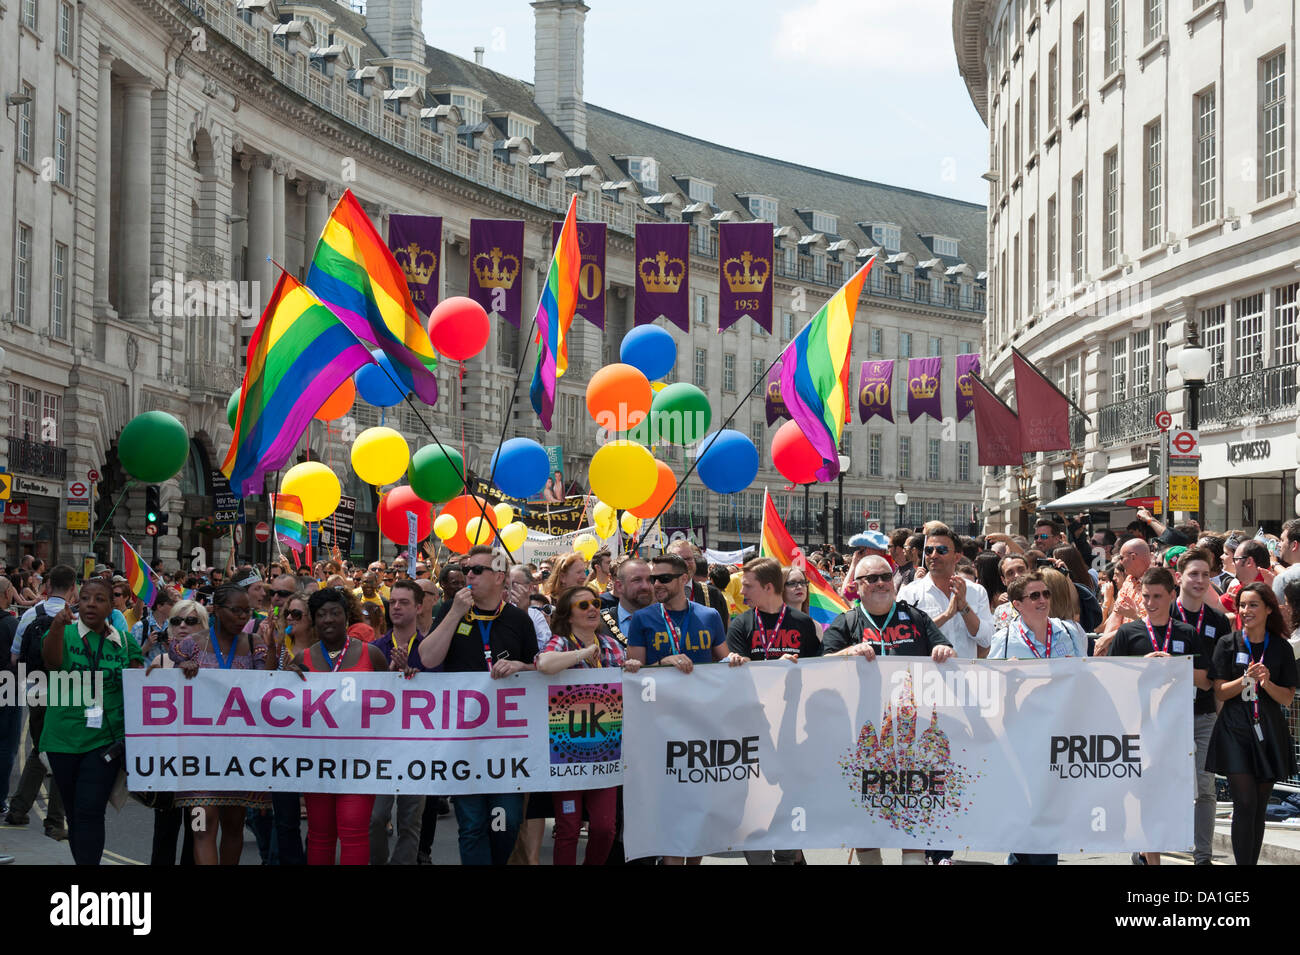 29th June 2013. The London Pride parade on Regent's Street in London. Photographer: Gordon Scammell Stock Photo